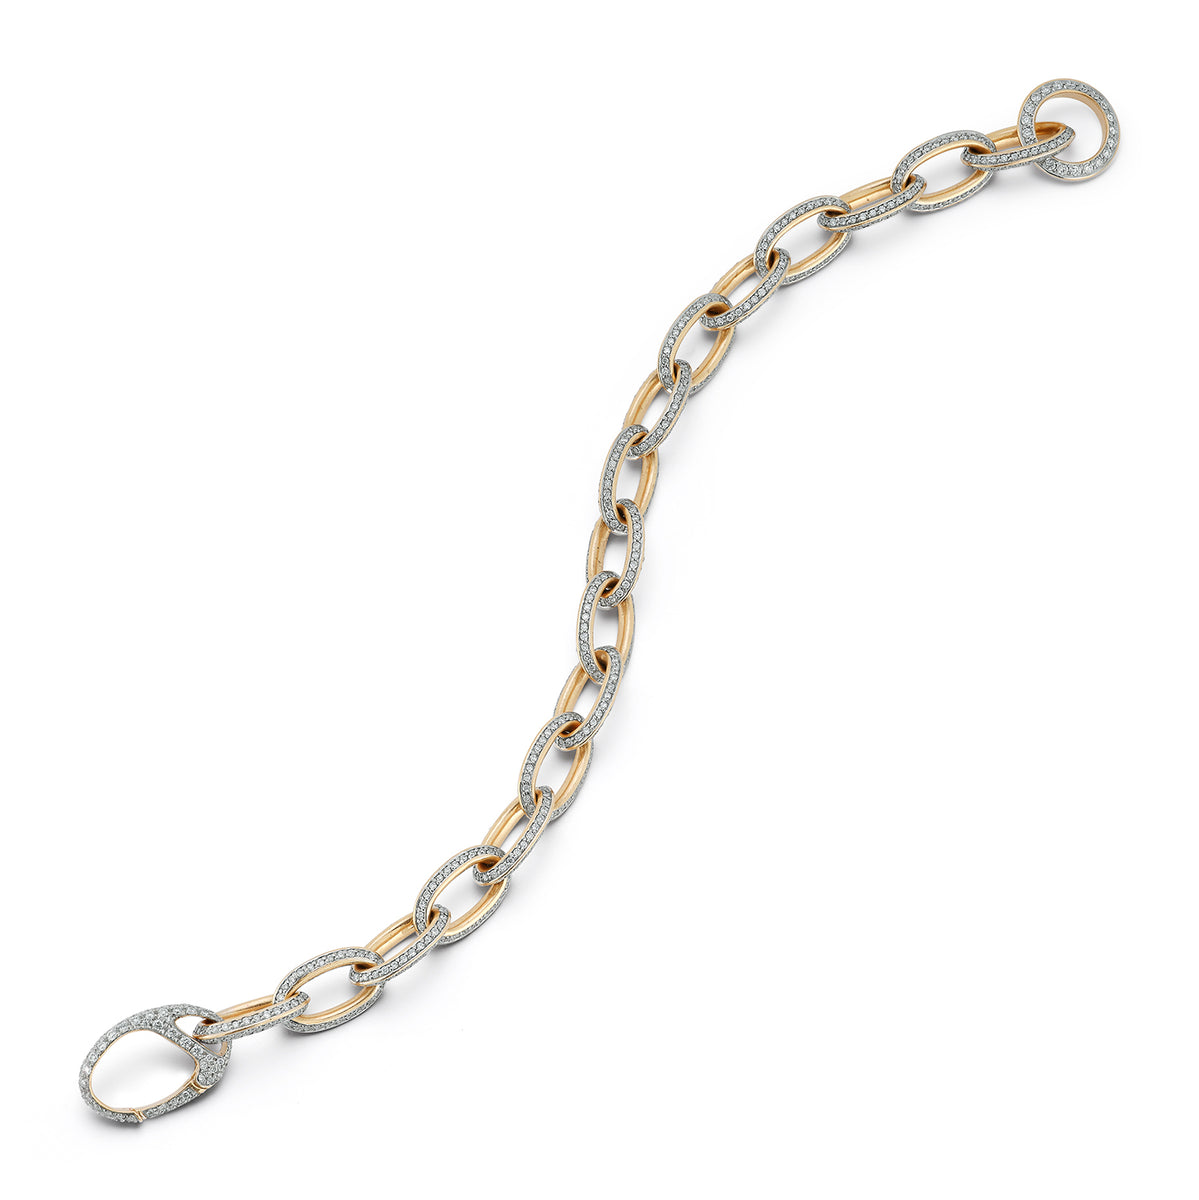 Clive Chain Link Bracelet with Diamond Clasp